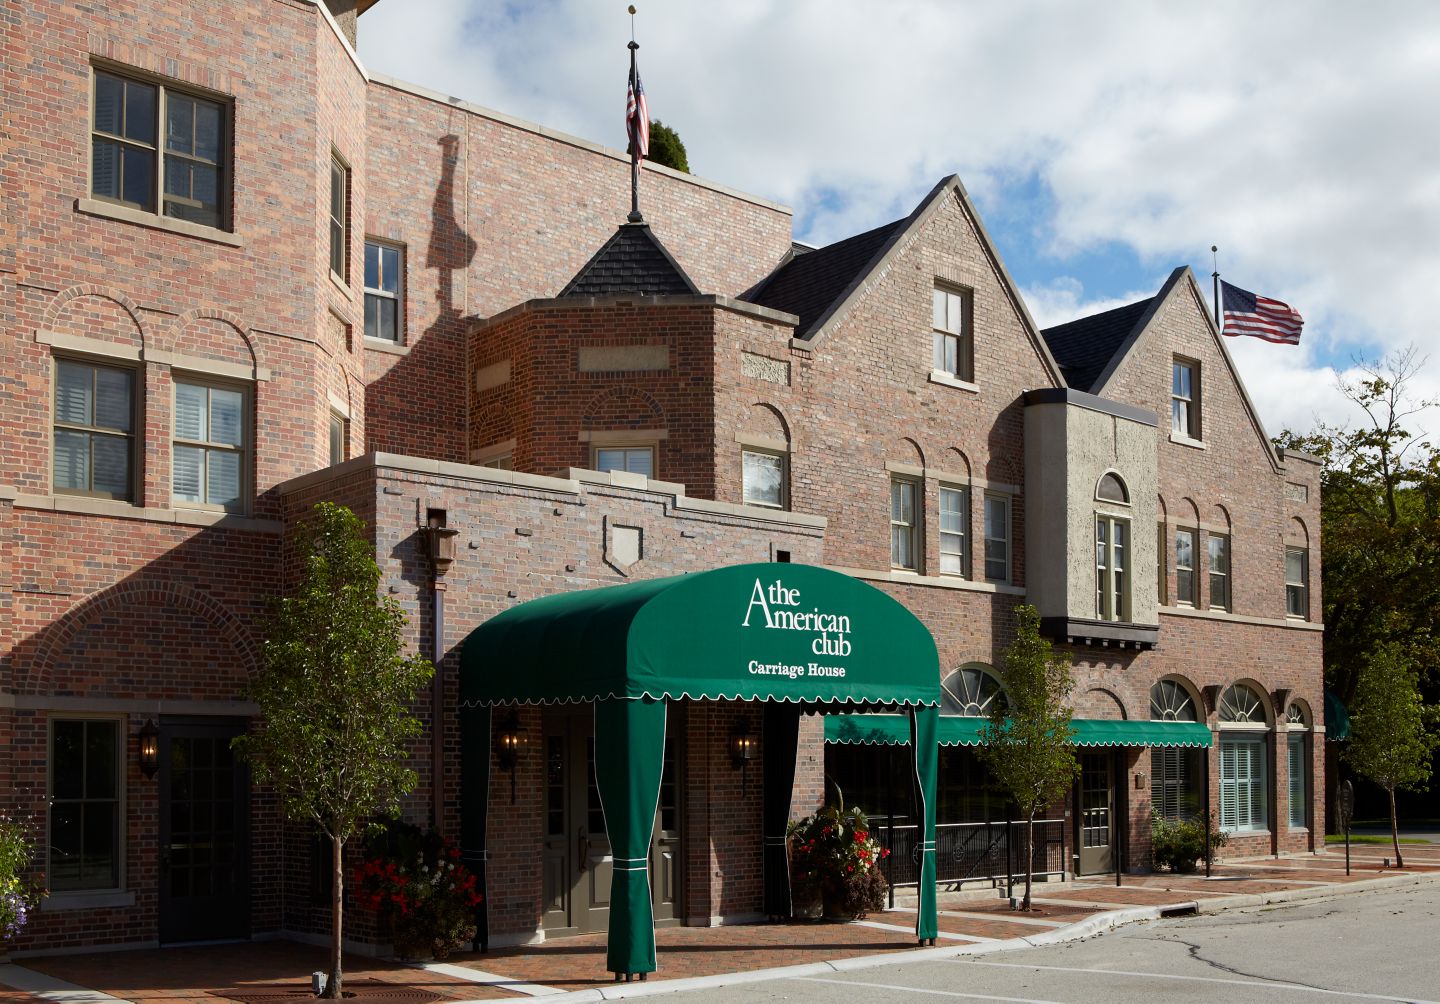 An exterior image of the awning outside the entrance of The Carriage House